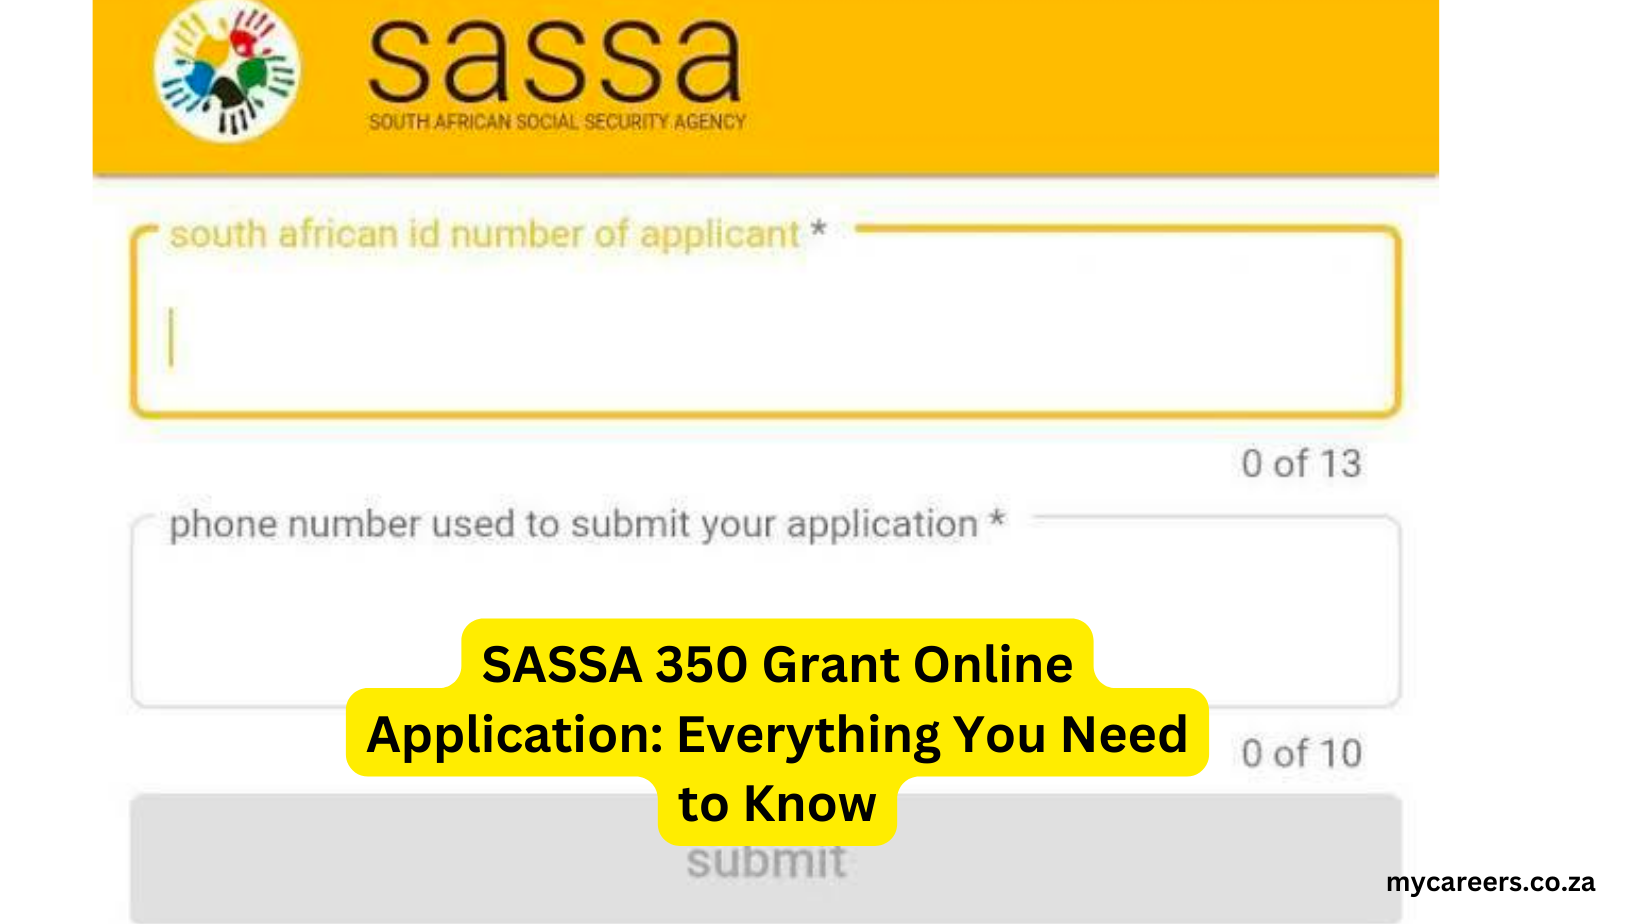 SASSA 350 Grant Online Application: Everything You Need to Know